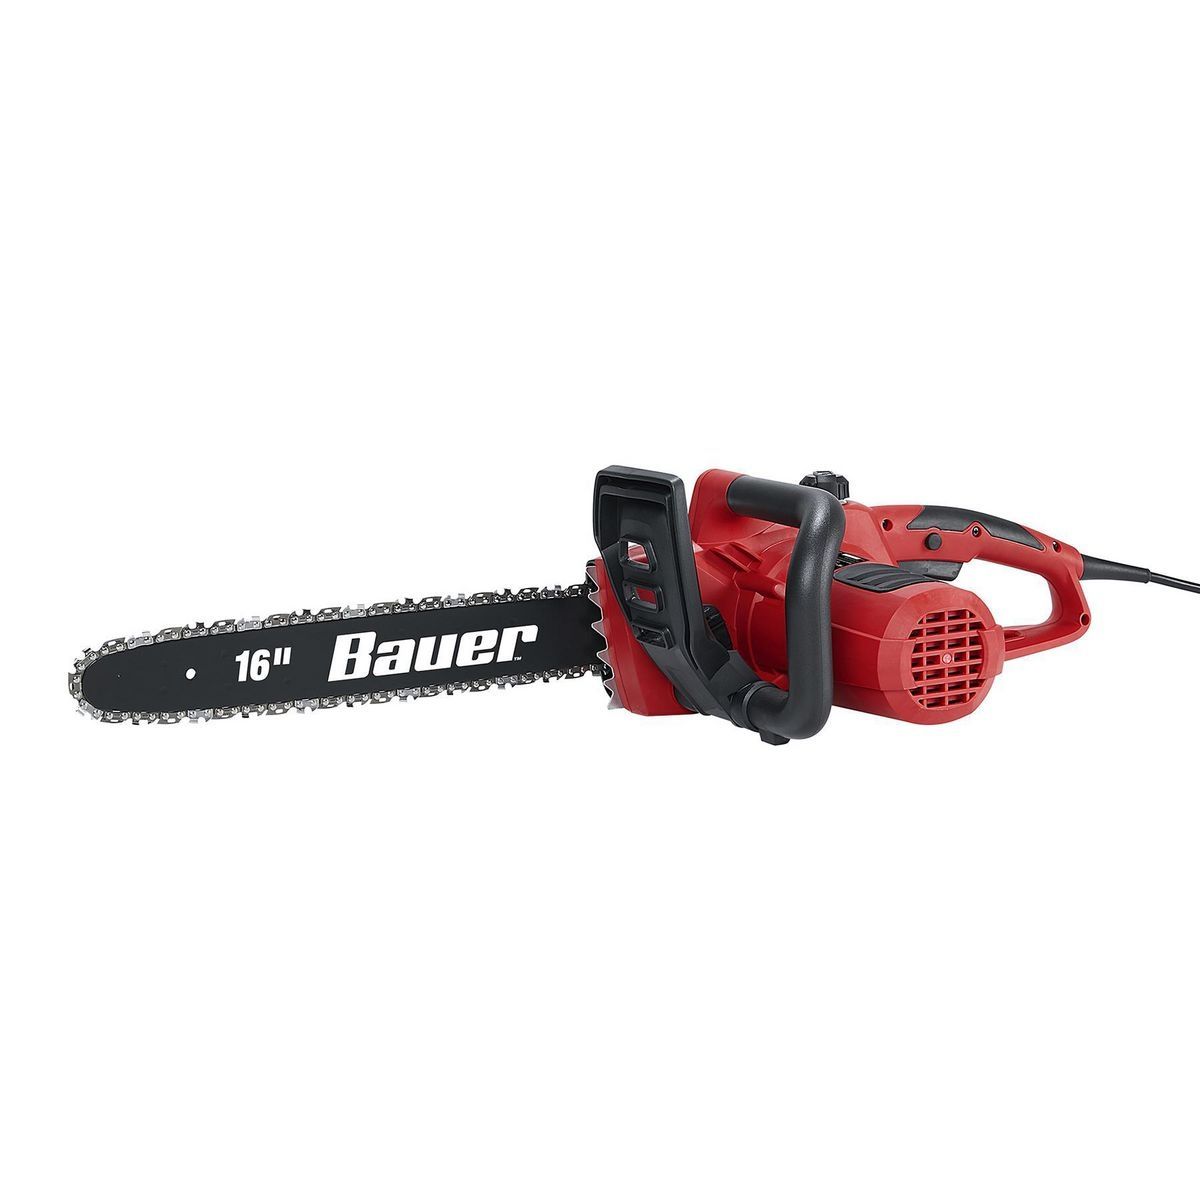 BAUER 14.5 Amp 16 in. Electric Chainsaw